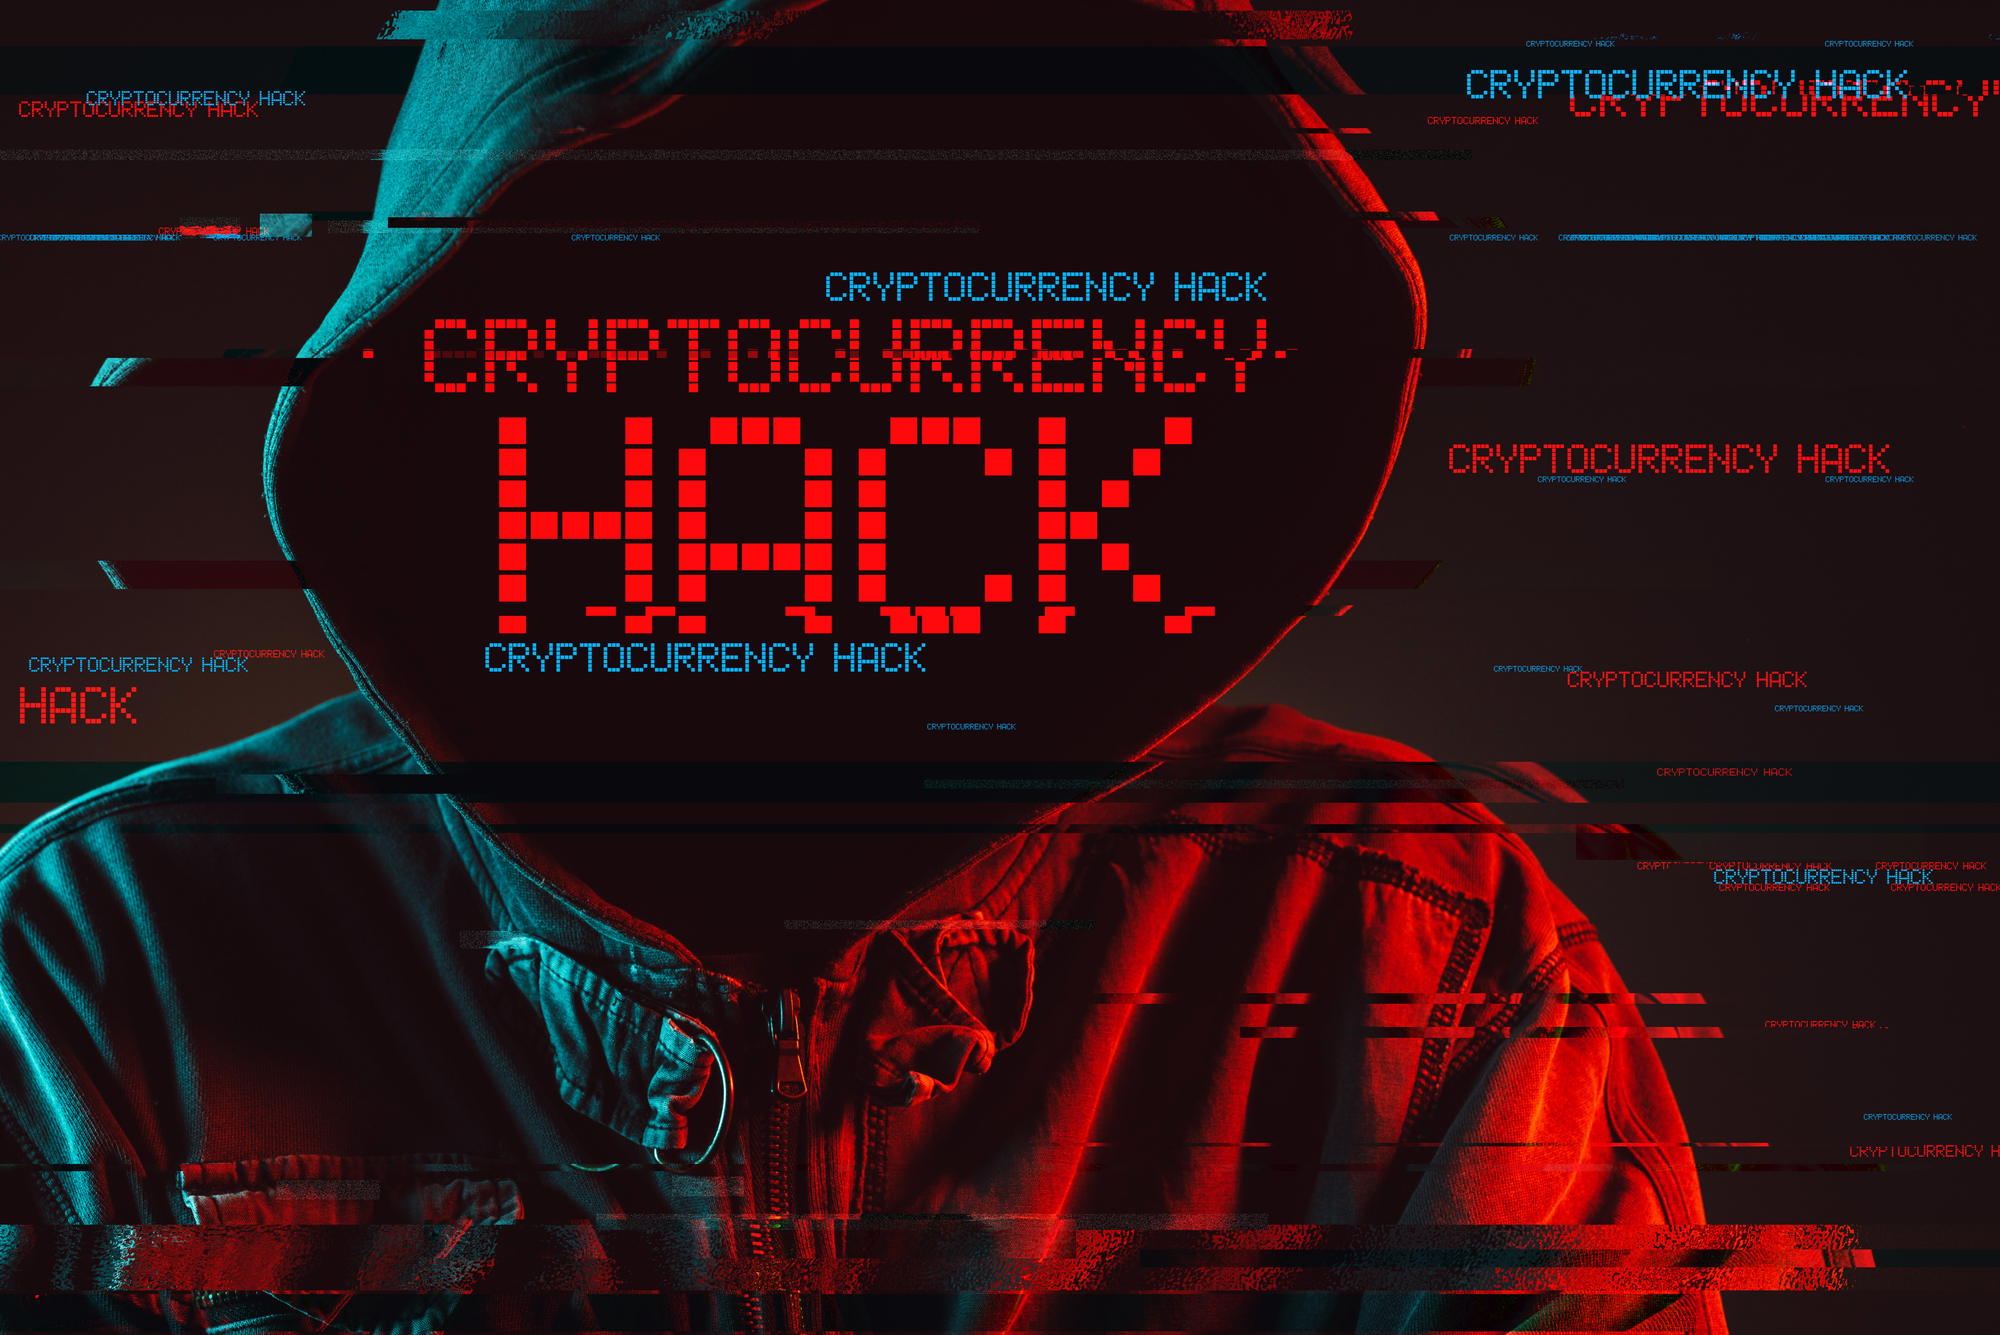 Cryptocurrency hack concept with faceless hooded male person, low key red and blue lit image and digital glitch effect